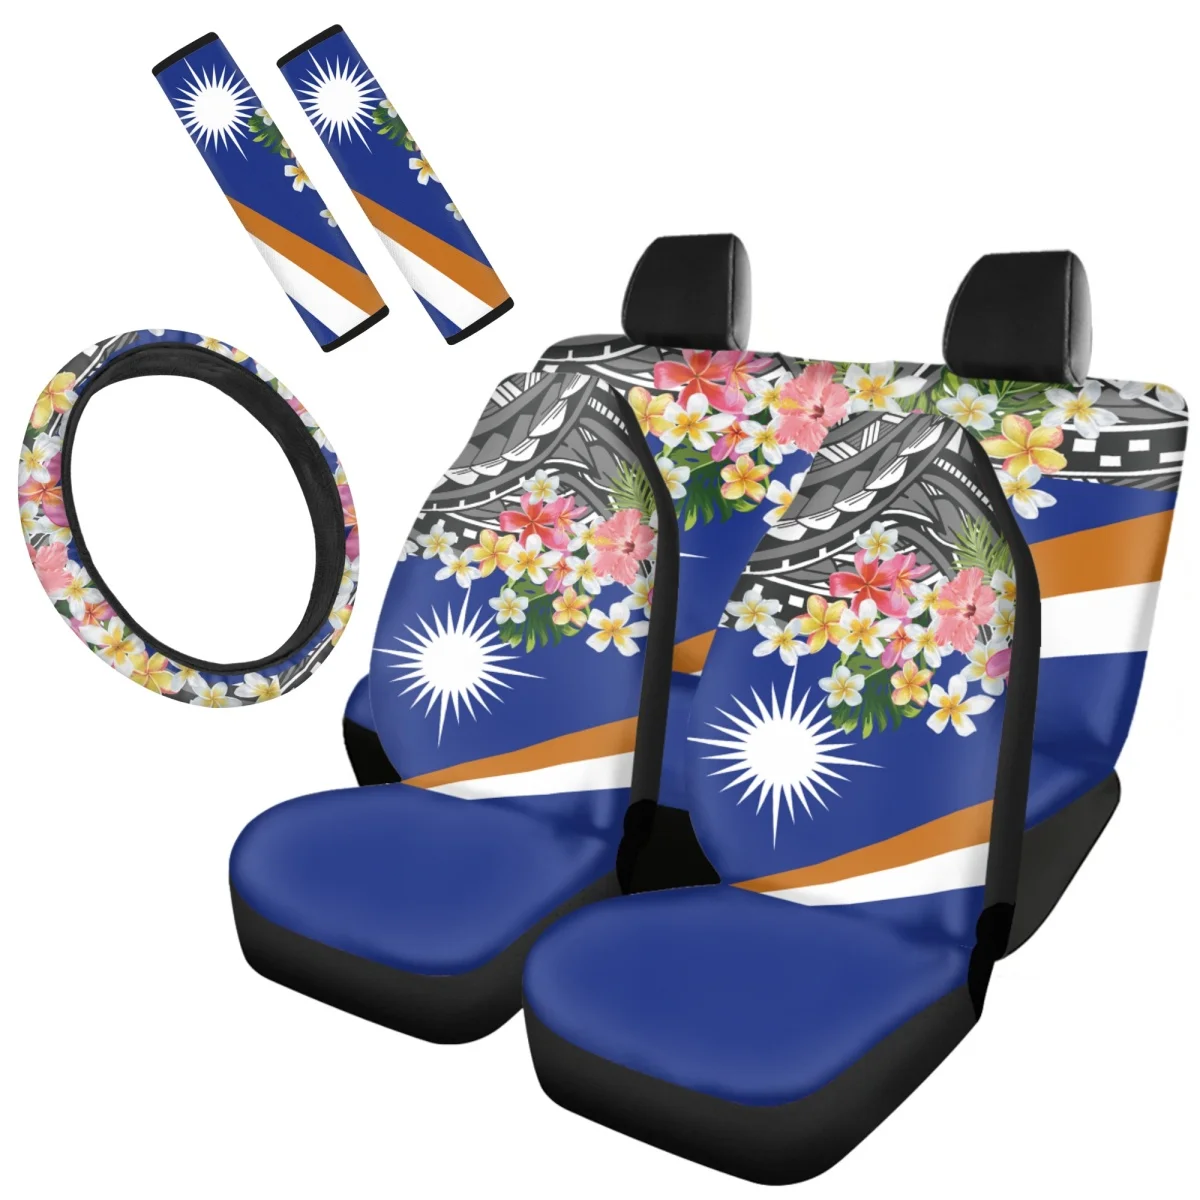 

Polynesian Hibiscus Frangipani Print Car Accessories Easy Install Washable Steering Wheel High Quality Front Back Seat Cover Set